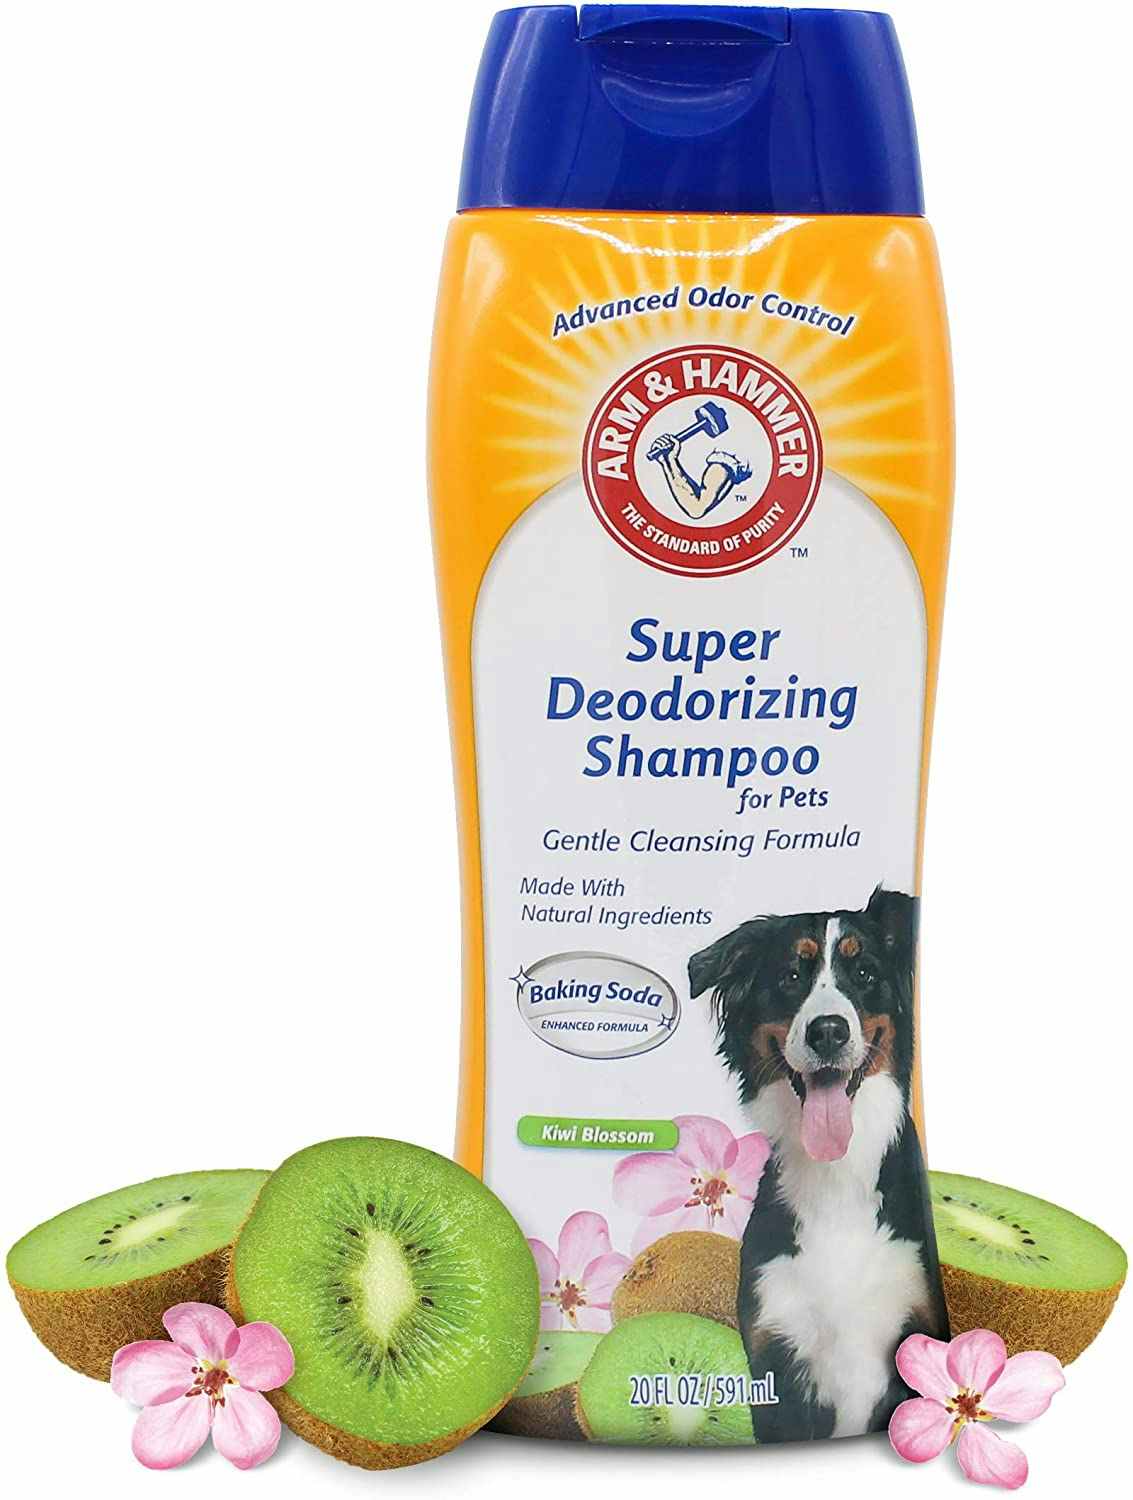 A bottle of Arm & Hammer deodorizing shampoo for pets.